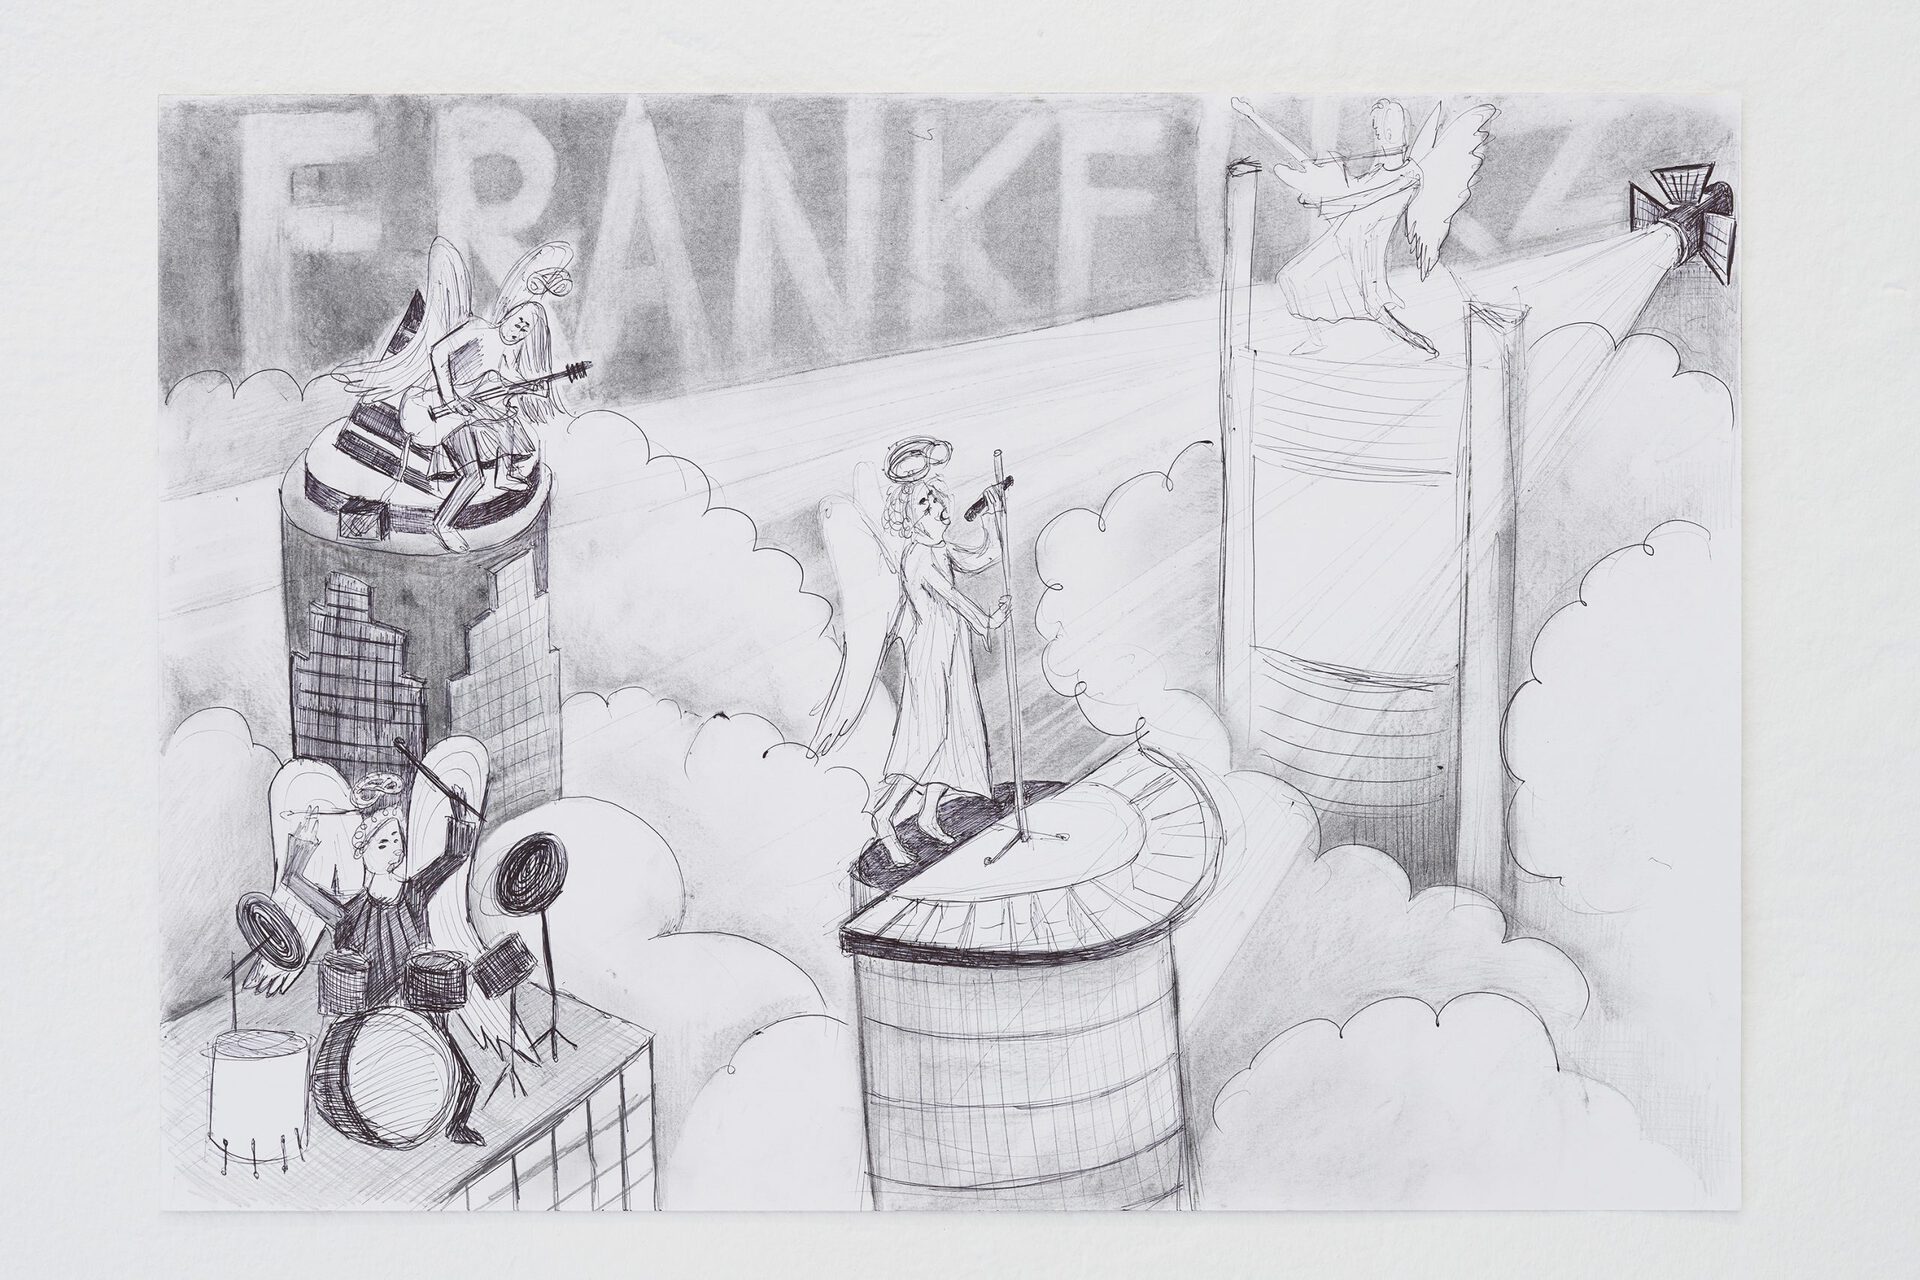 Niclas Riepshoff, Untitled (Frankfurz), 2021, charcoal and pen on paper, 59,4 x 42,0 cm